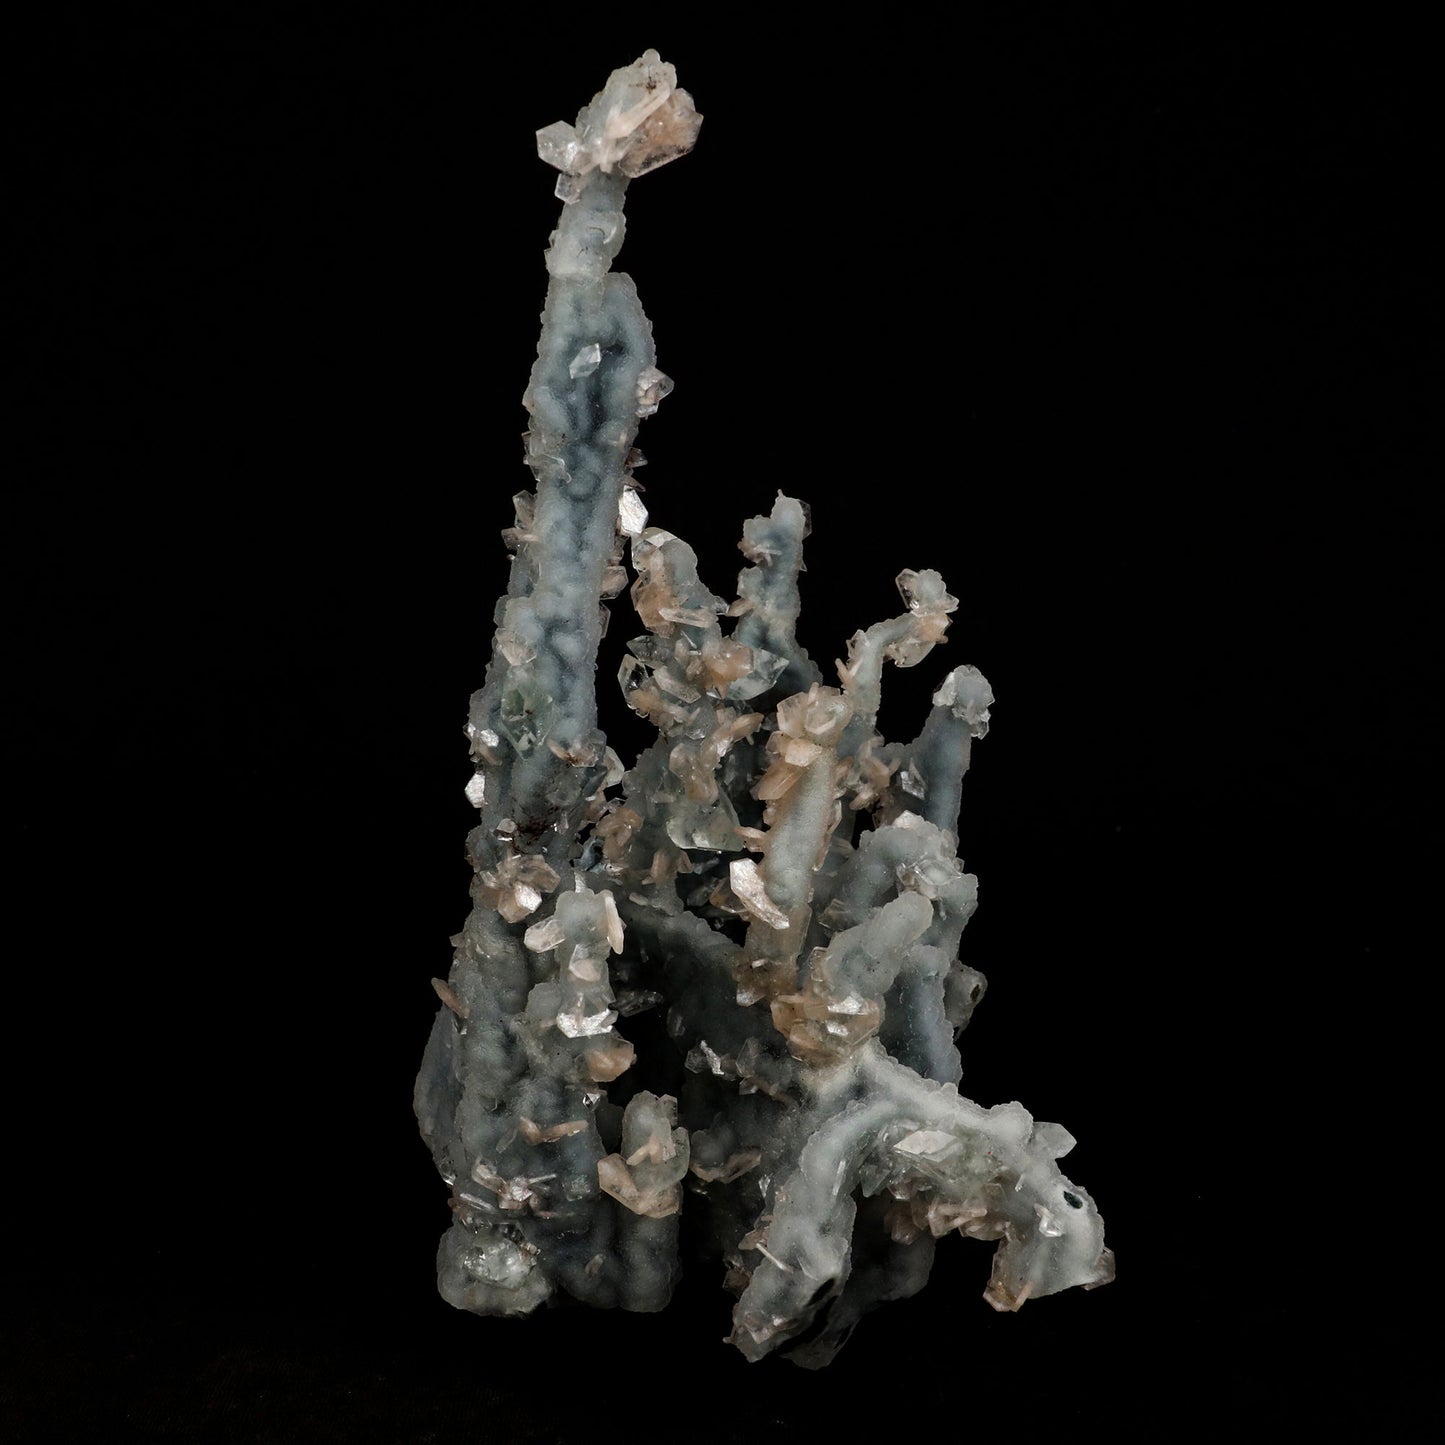 Stilbite Crystals on Chalcedony Coral Formation Natural Mineral Specim…  https://www.superbminerals.us/products/stilbite-crystals-on-chalcedony-coral-formation-natural-mineral-specimen-b-5319  Features: Unusual Stilbite from India, exhibiting a transparent, beige crystal with a pearly sheen sitting atop an off-white stalactitic Chalcedony cluster in an aesthetically pleasing display. A one-of-a-kind item in superb condition. Primary Mineral(s):&nbsp;Chalcedony Secondary Mineral(s):&nbsp;Stilbite